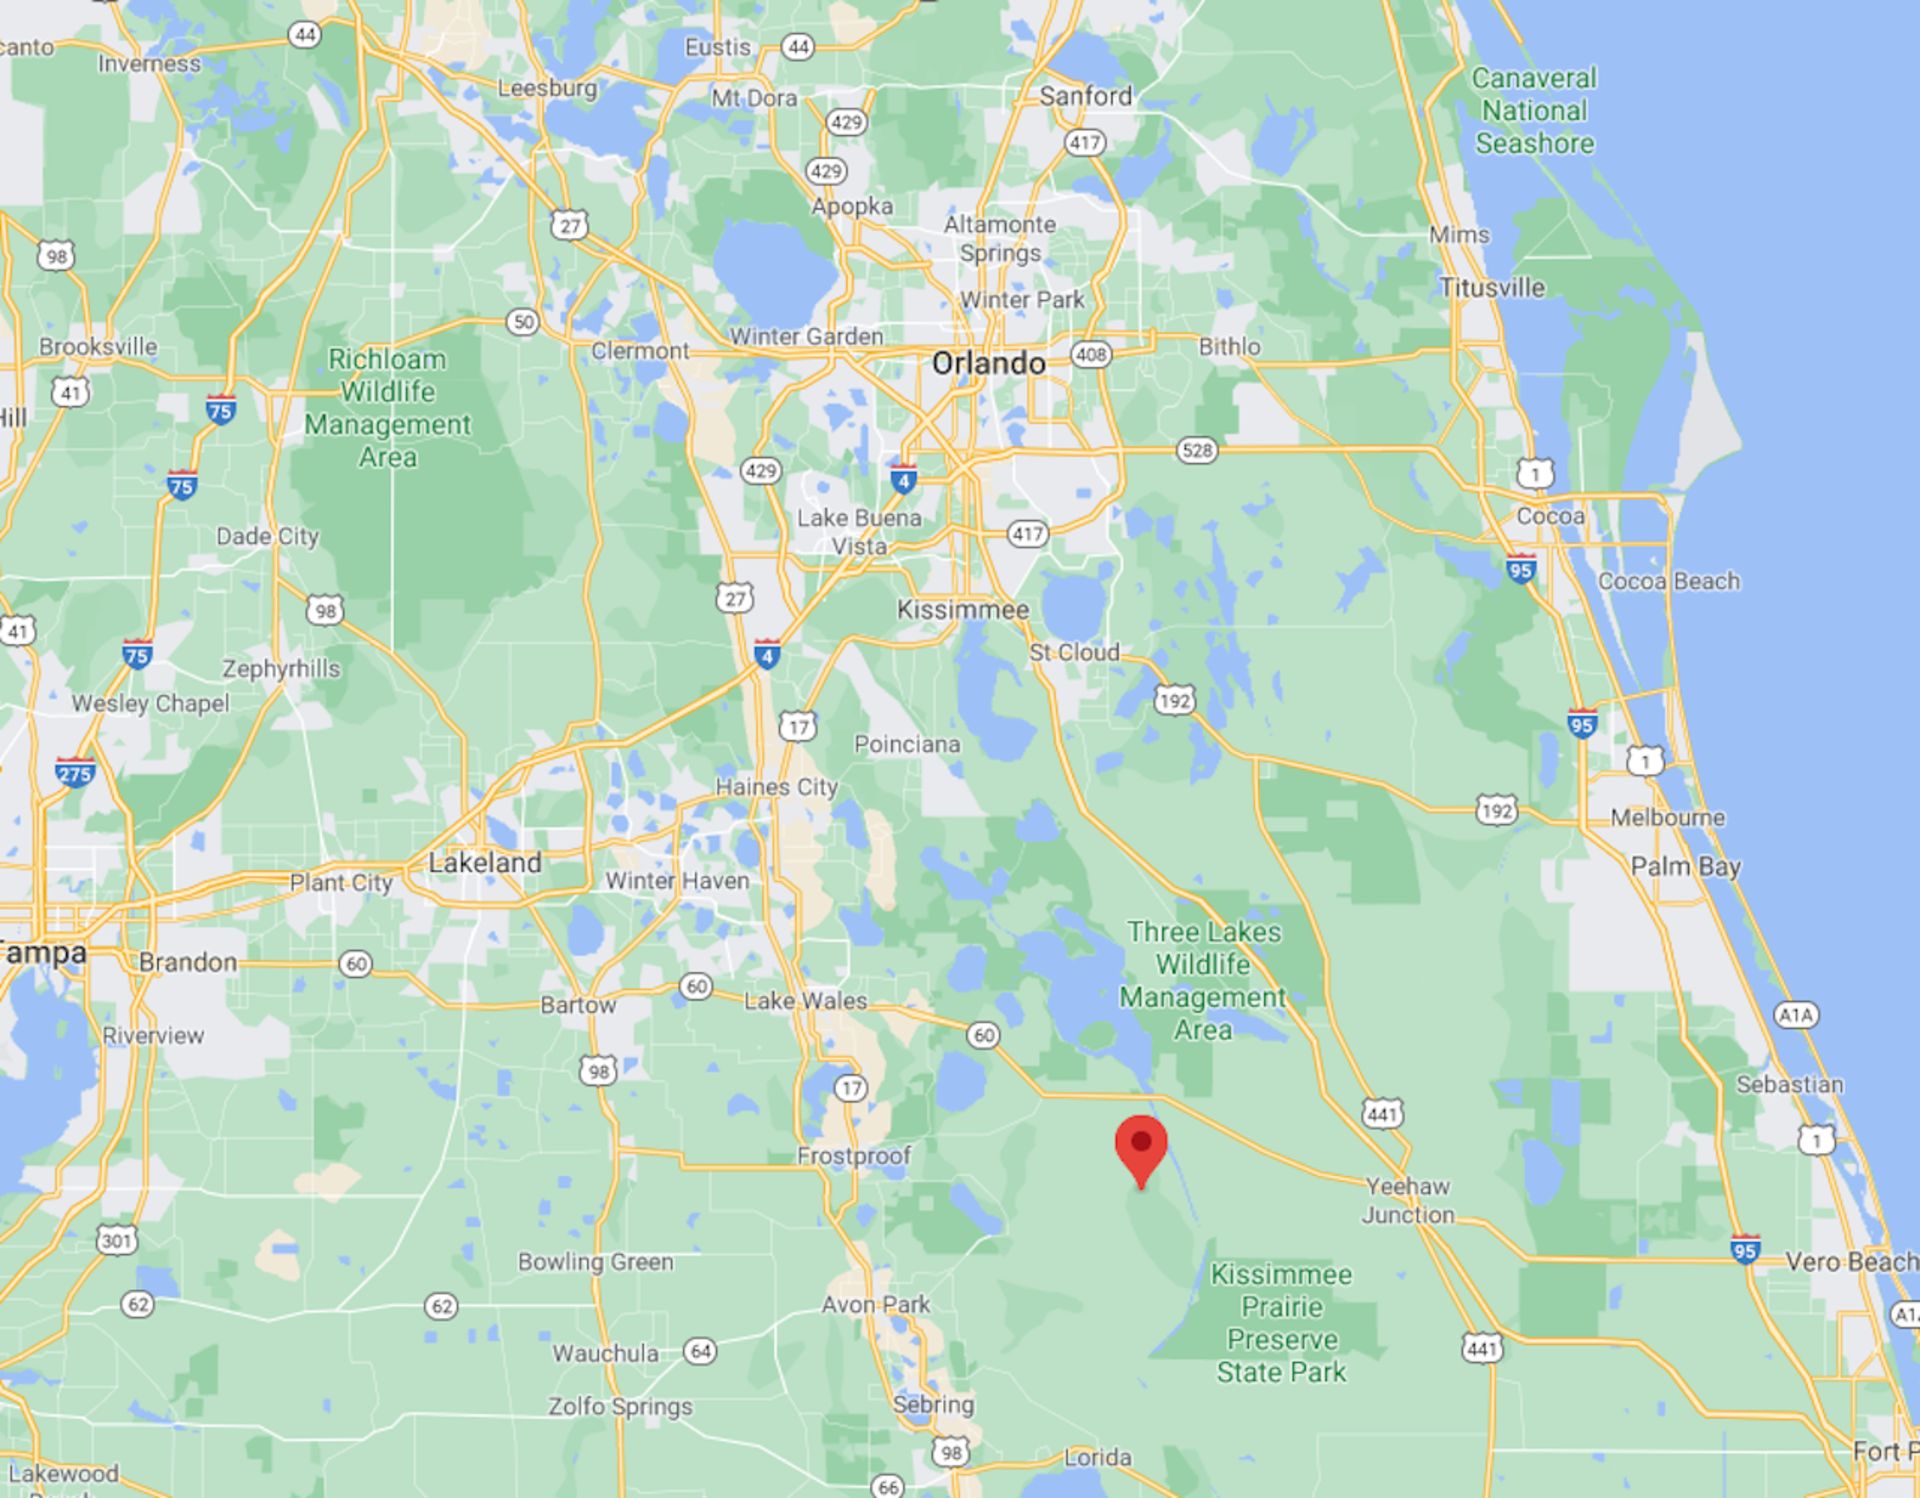 Near Lakes, Lakes, and More Lakes in Sunny Florida! - Image 2 of 6